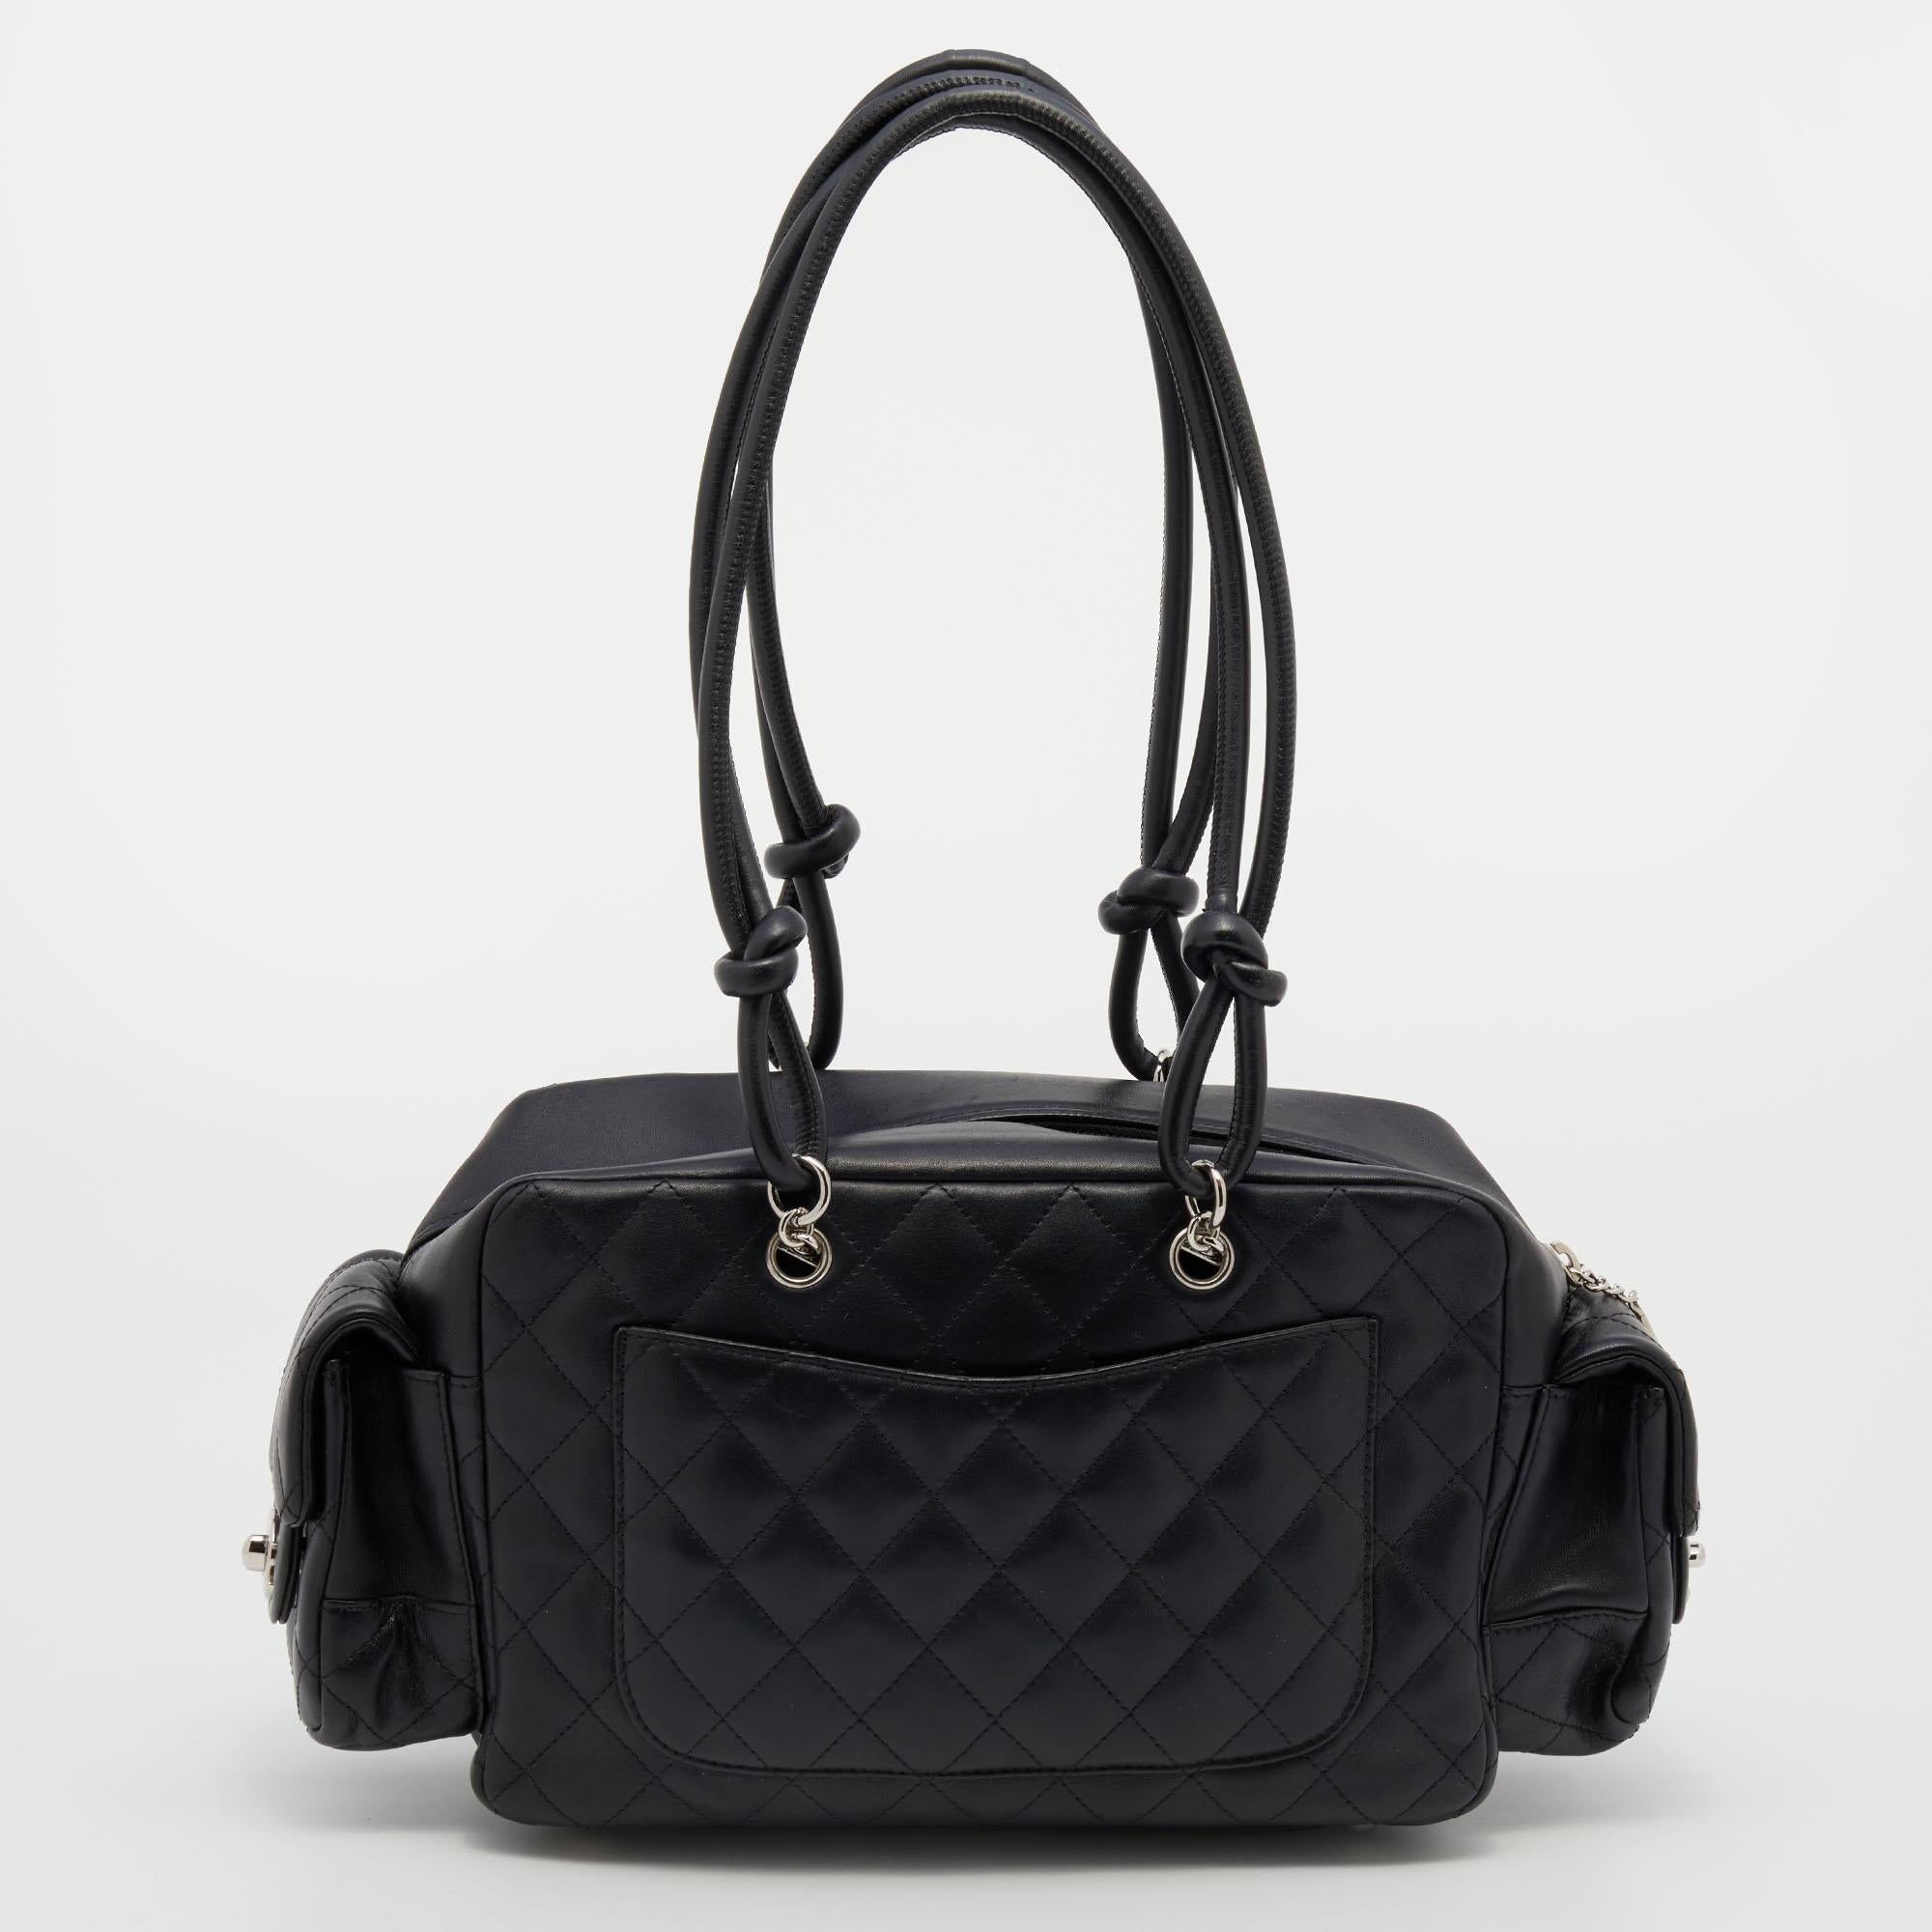 This Reporter bag is just as grand as the other Chanel handbags. Exquisitely crafted from leather into a functional design, it is added with the CC logo and multiple pockets. The two handles allow a shoulder carry option and the lined interior